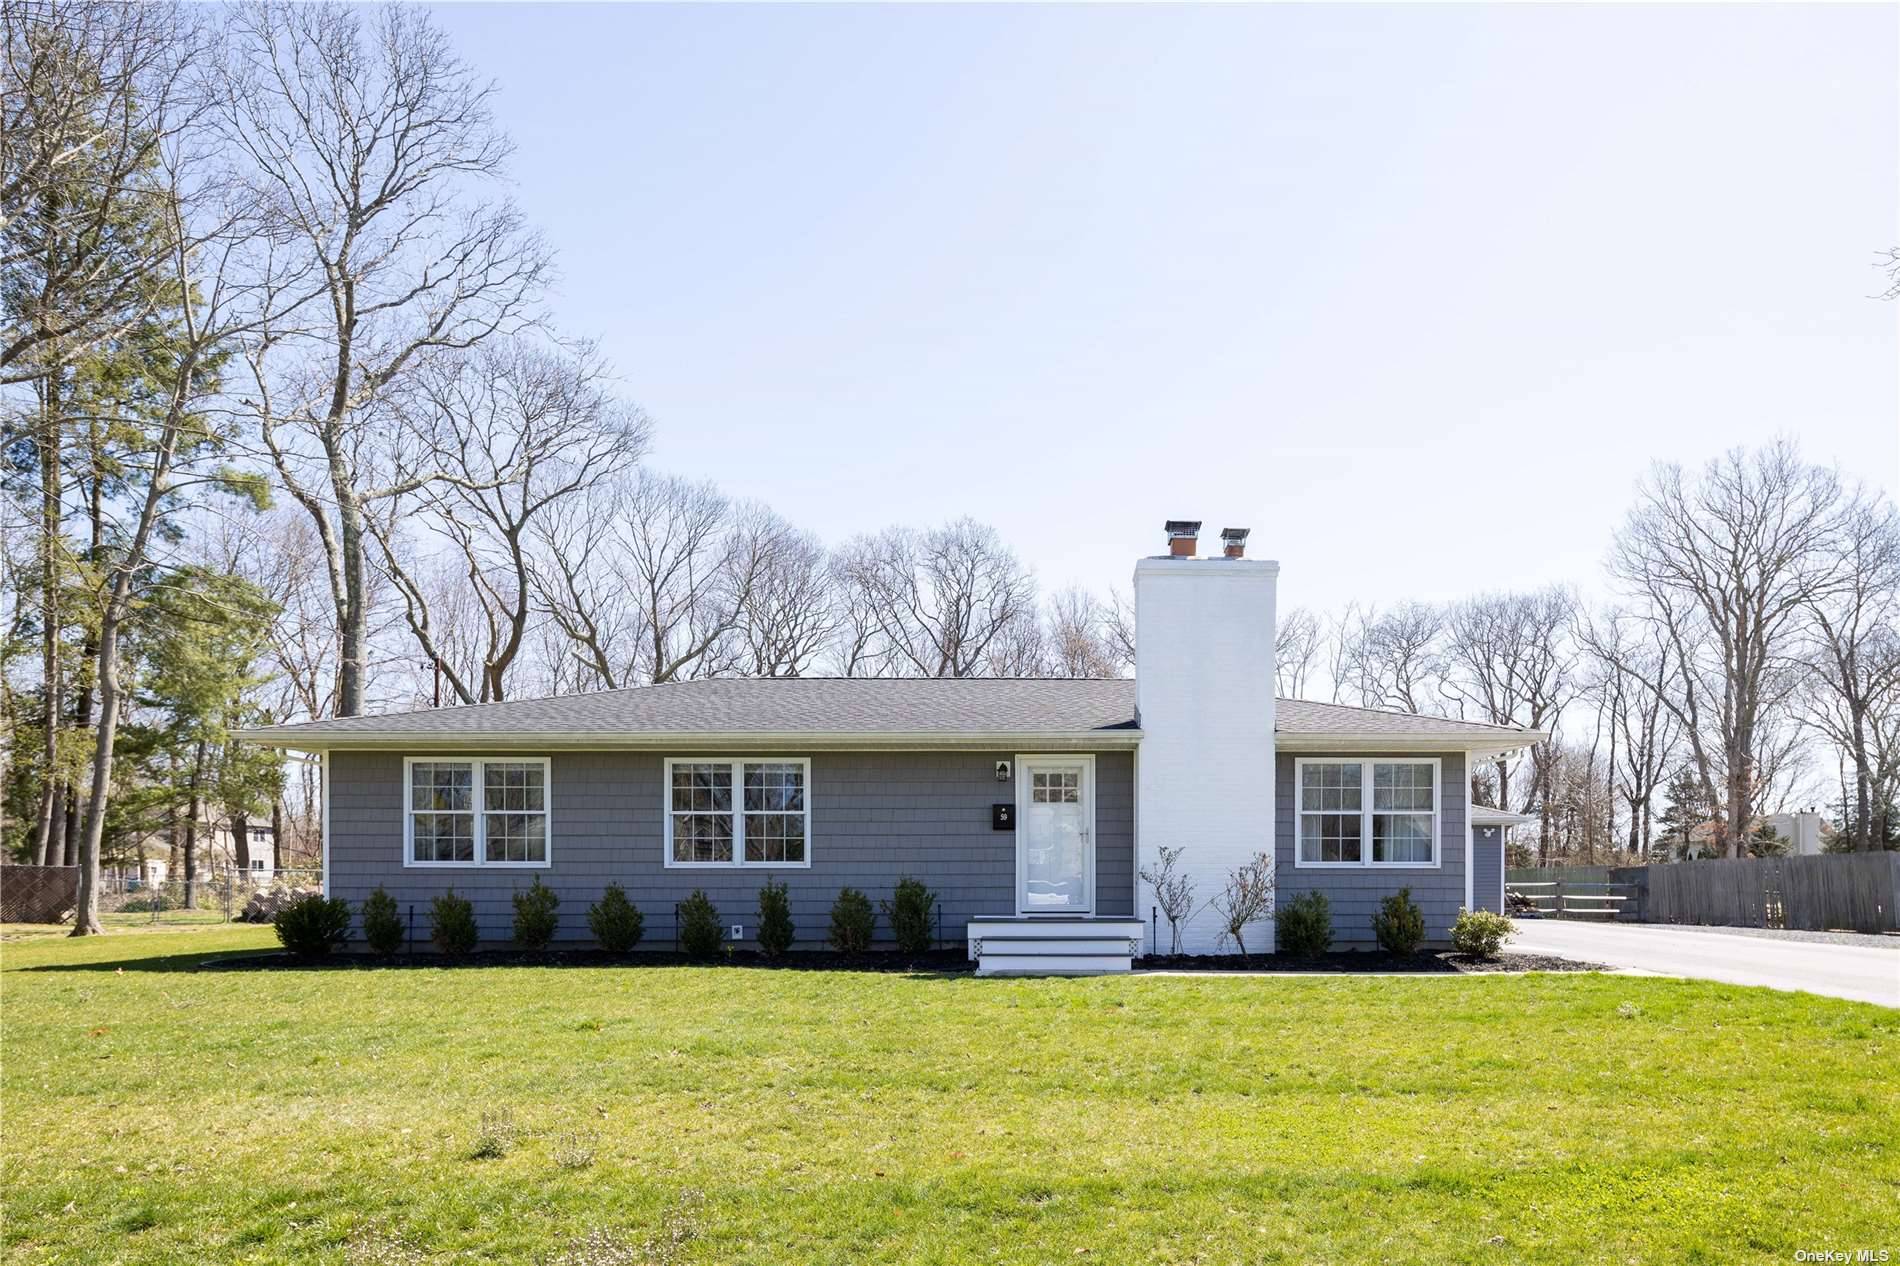 Beautiful generous property with a lovely completely renovated home is waiting for you.